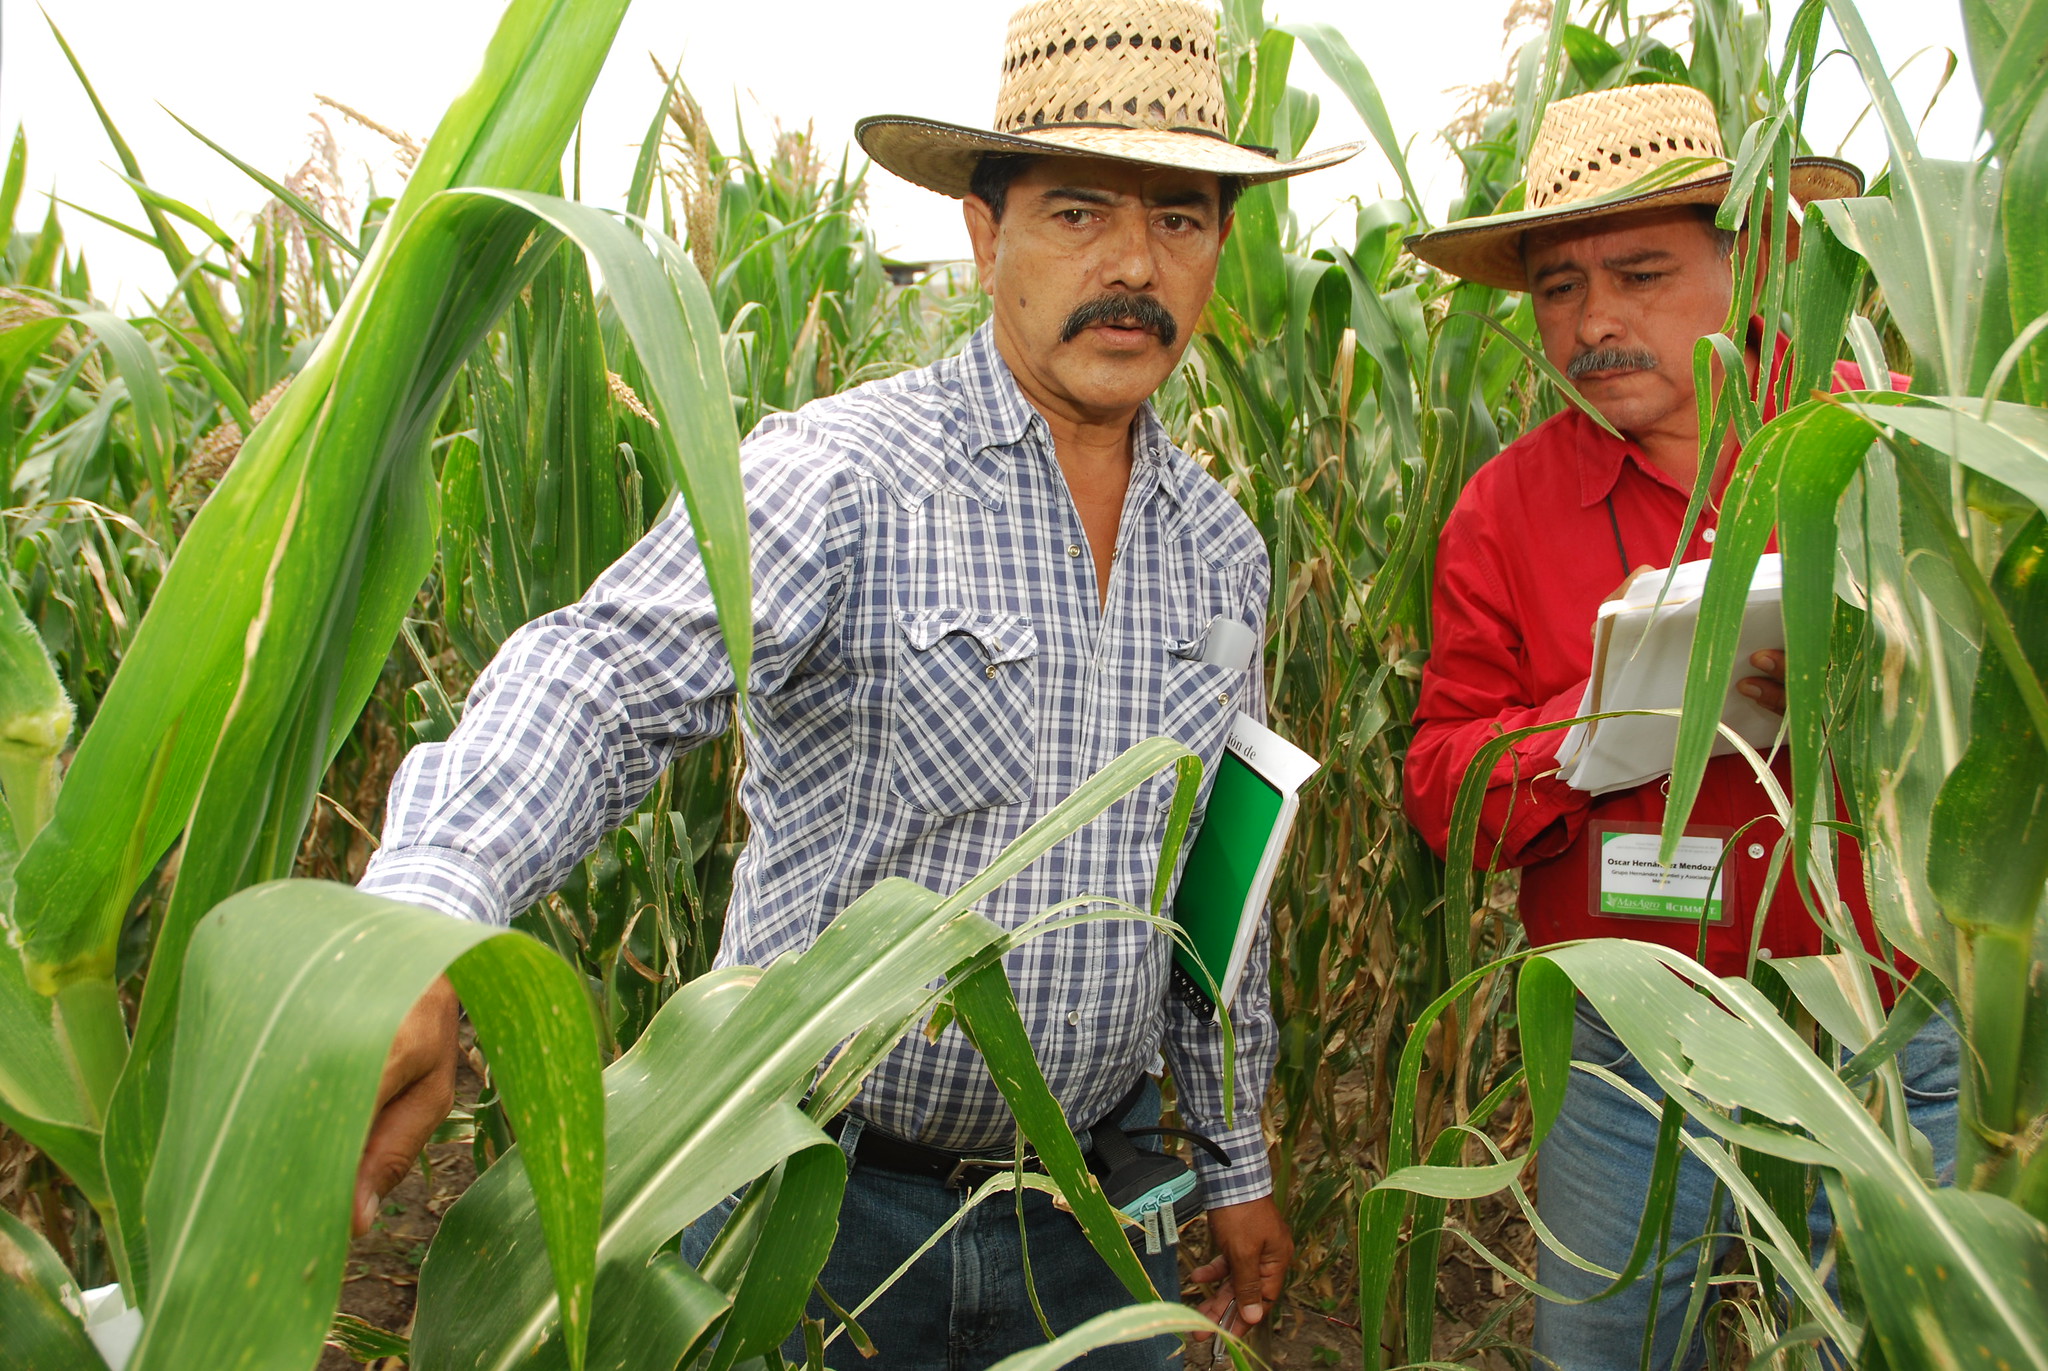 Farmers in Mexico attend a workshop organized by CIMMYT to build their capacity in seed production. (Photo: X. Fonseca/CIMMYT)